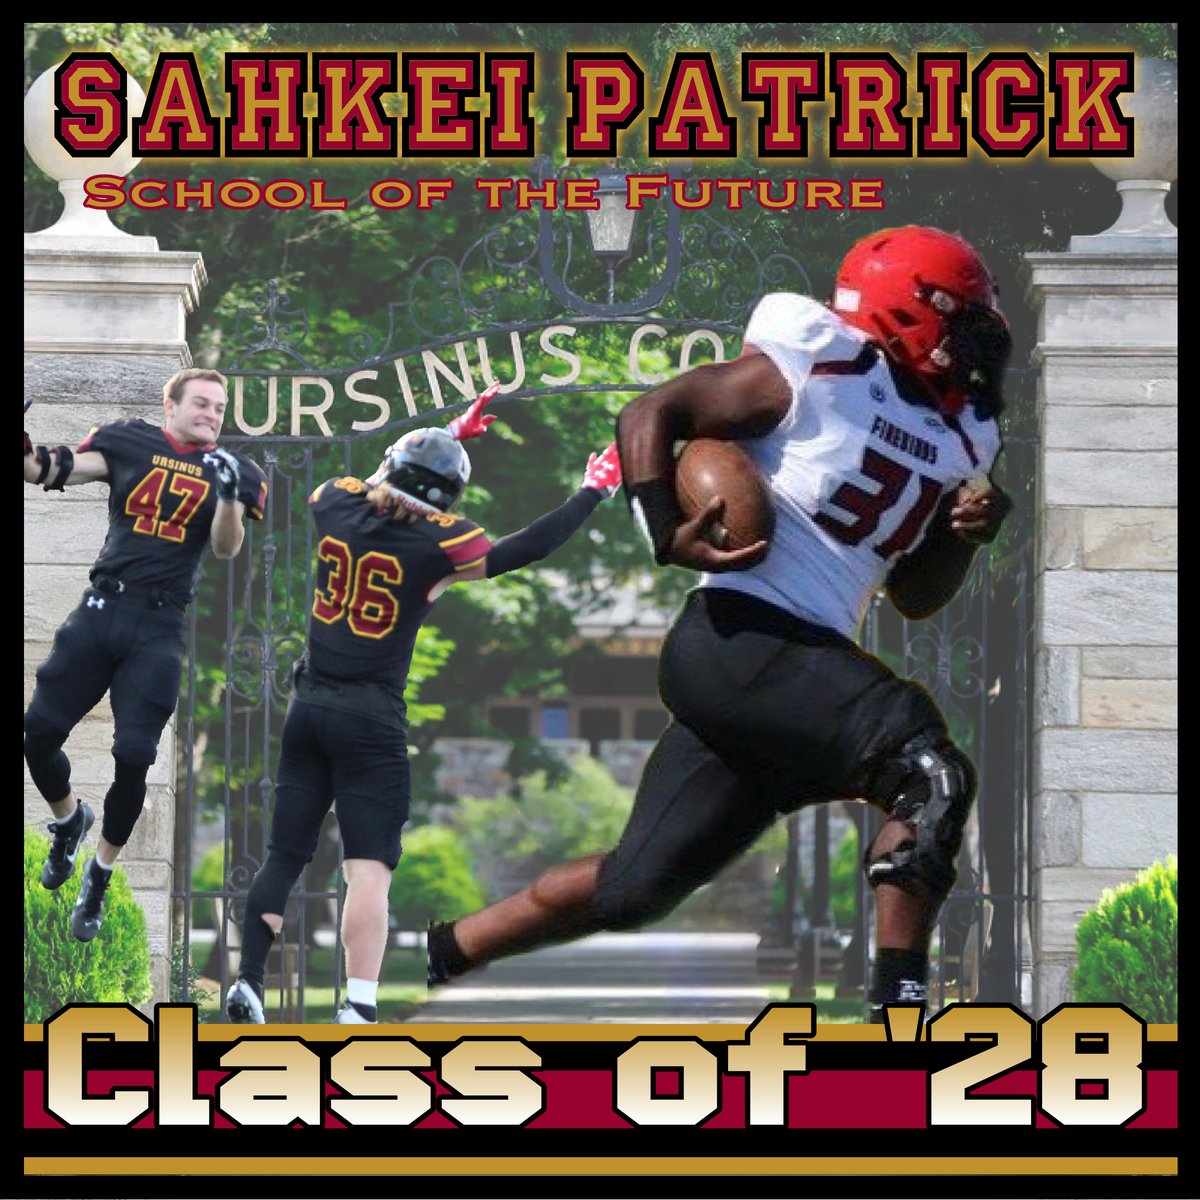 Welcome @PatrickSahkei33 of @phillysof to the Ursinus Football Class of 2028! #WelcomeToTheBearsDen #UCFB131 hudl.com/athlete/o/1882…